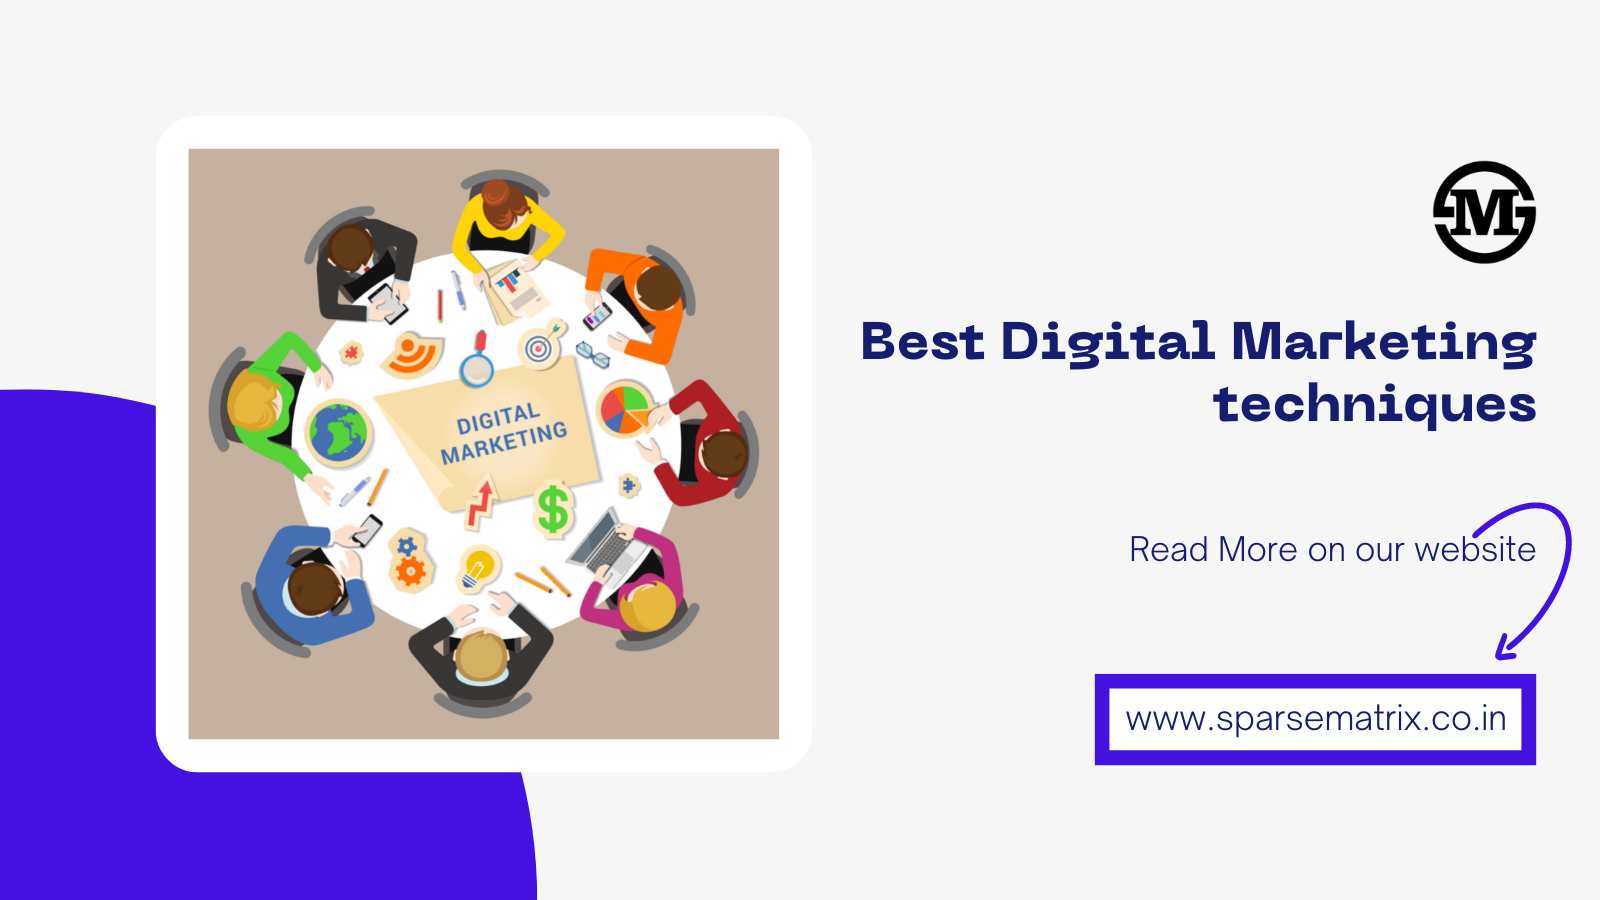 Which Digital Marketing Techniques Are the Most Effective Today?